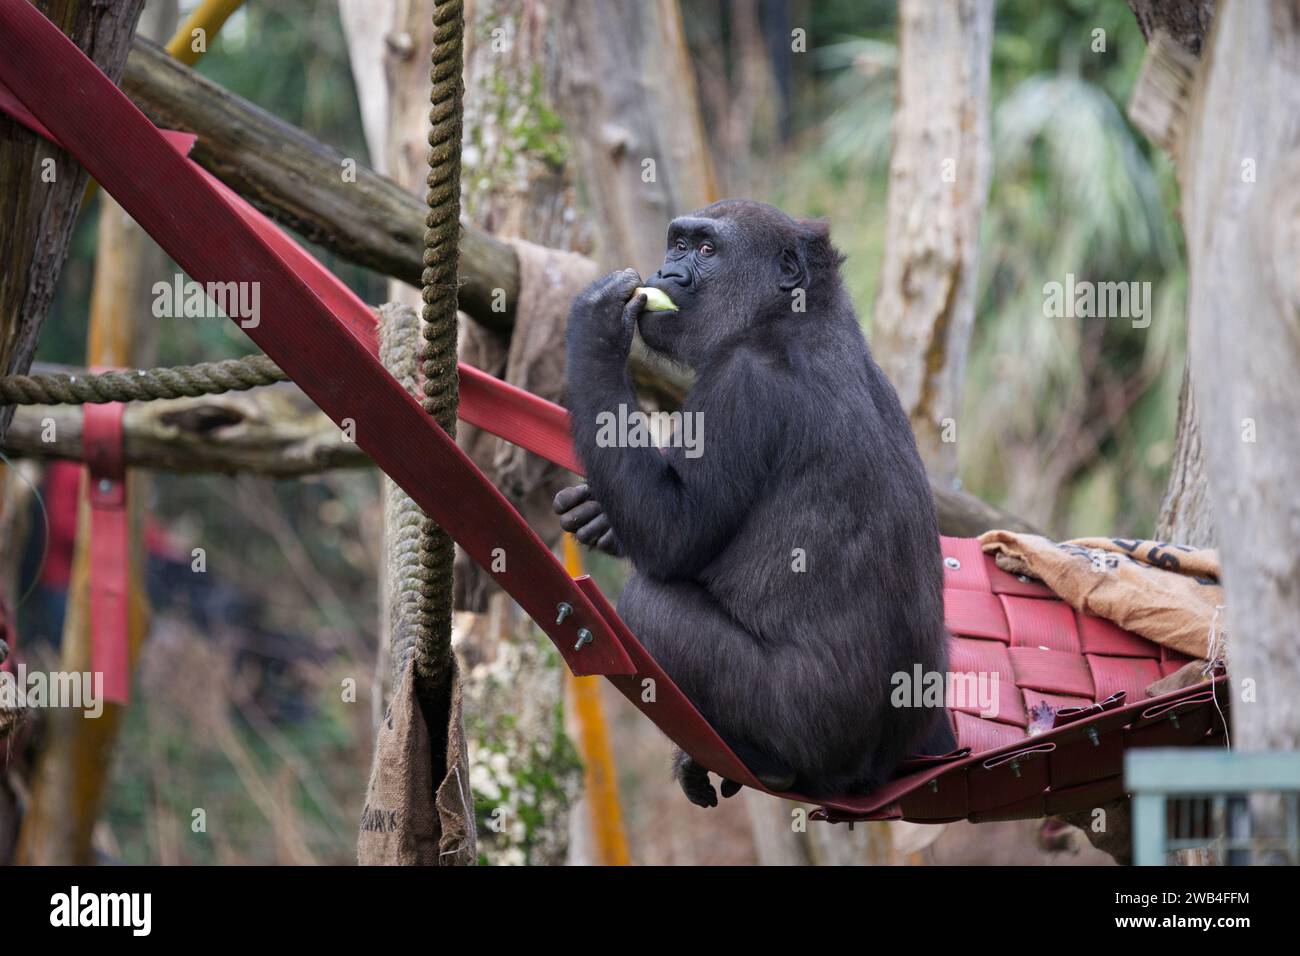 A female Western lowland gorilla eating food and looking at the camera at London Zoo Stock Photo